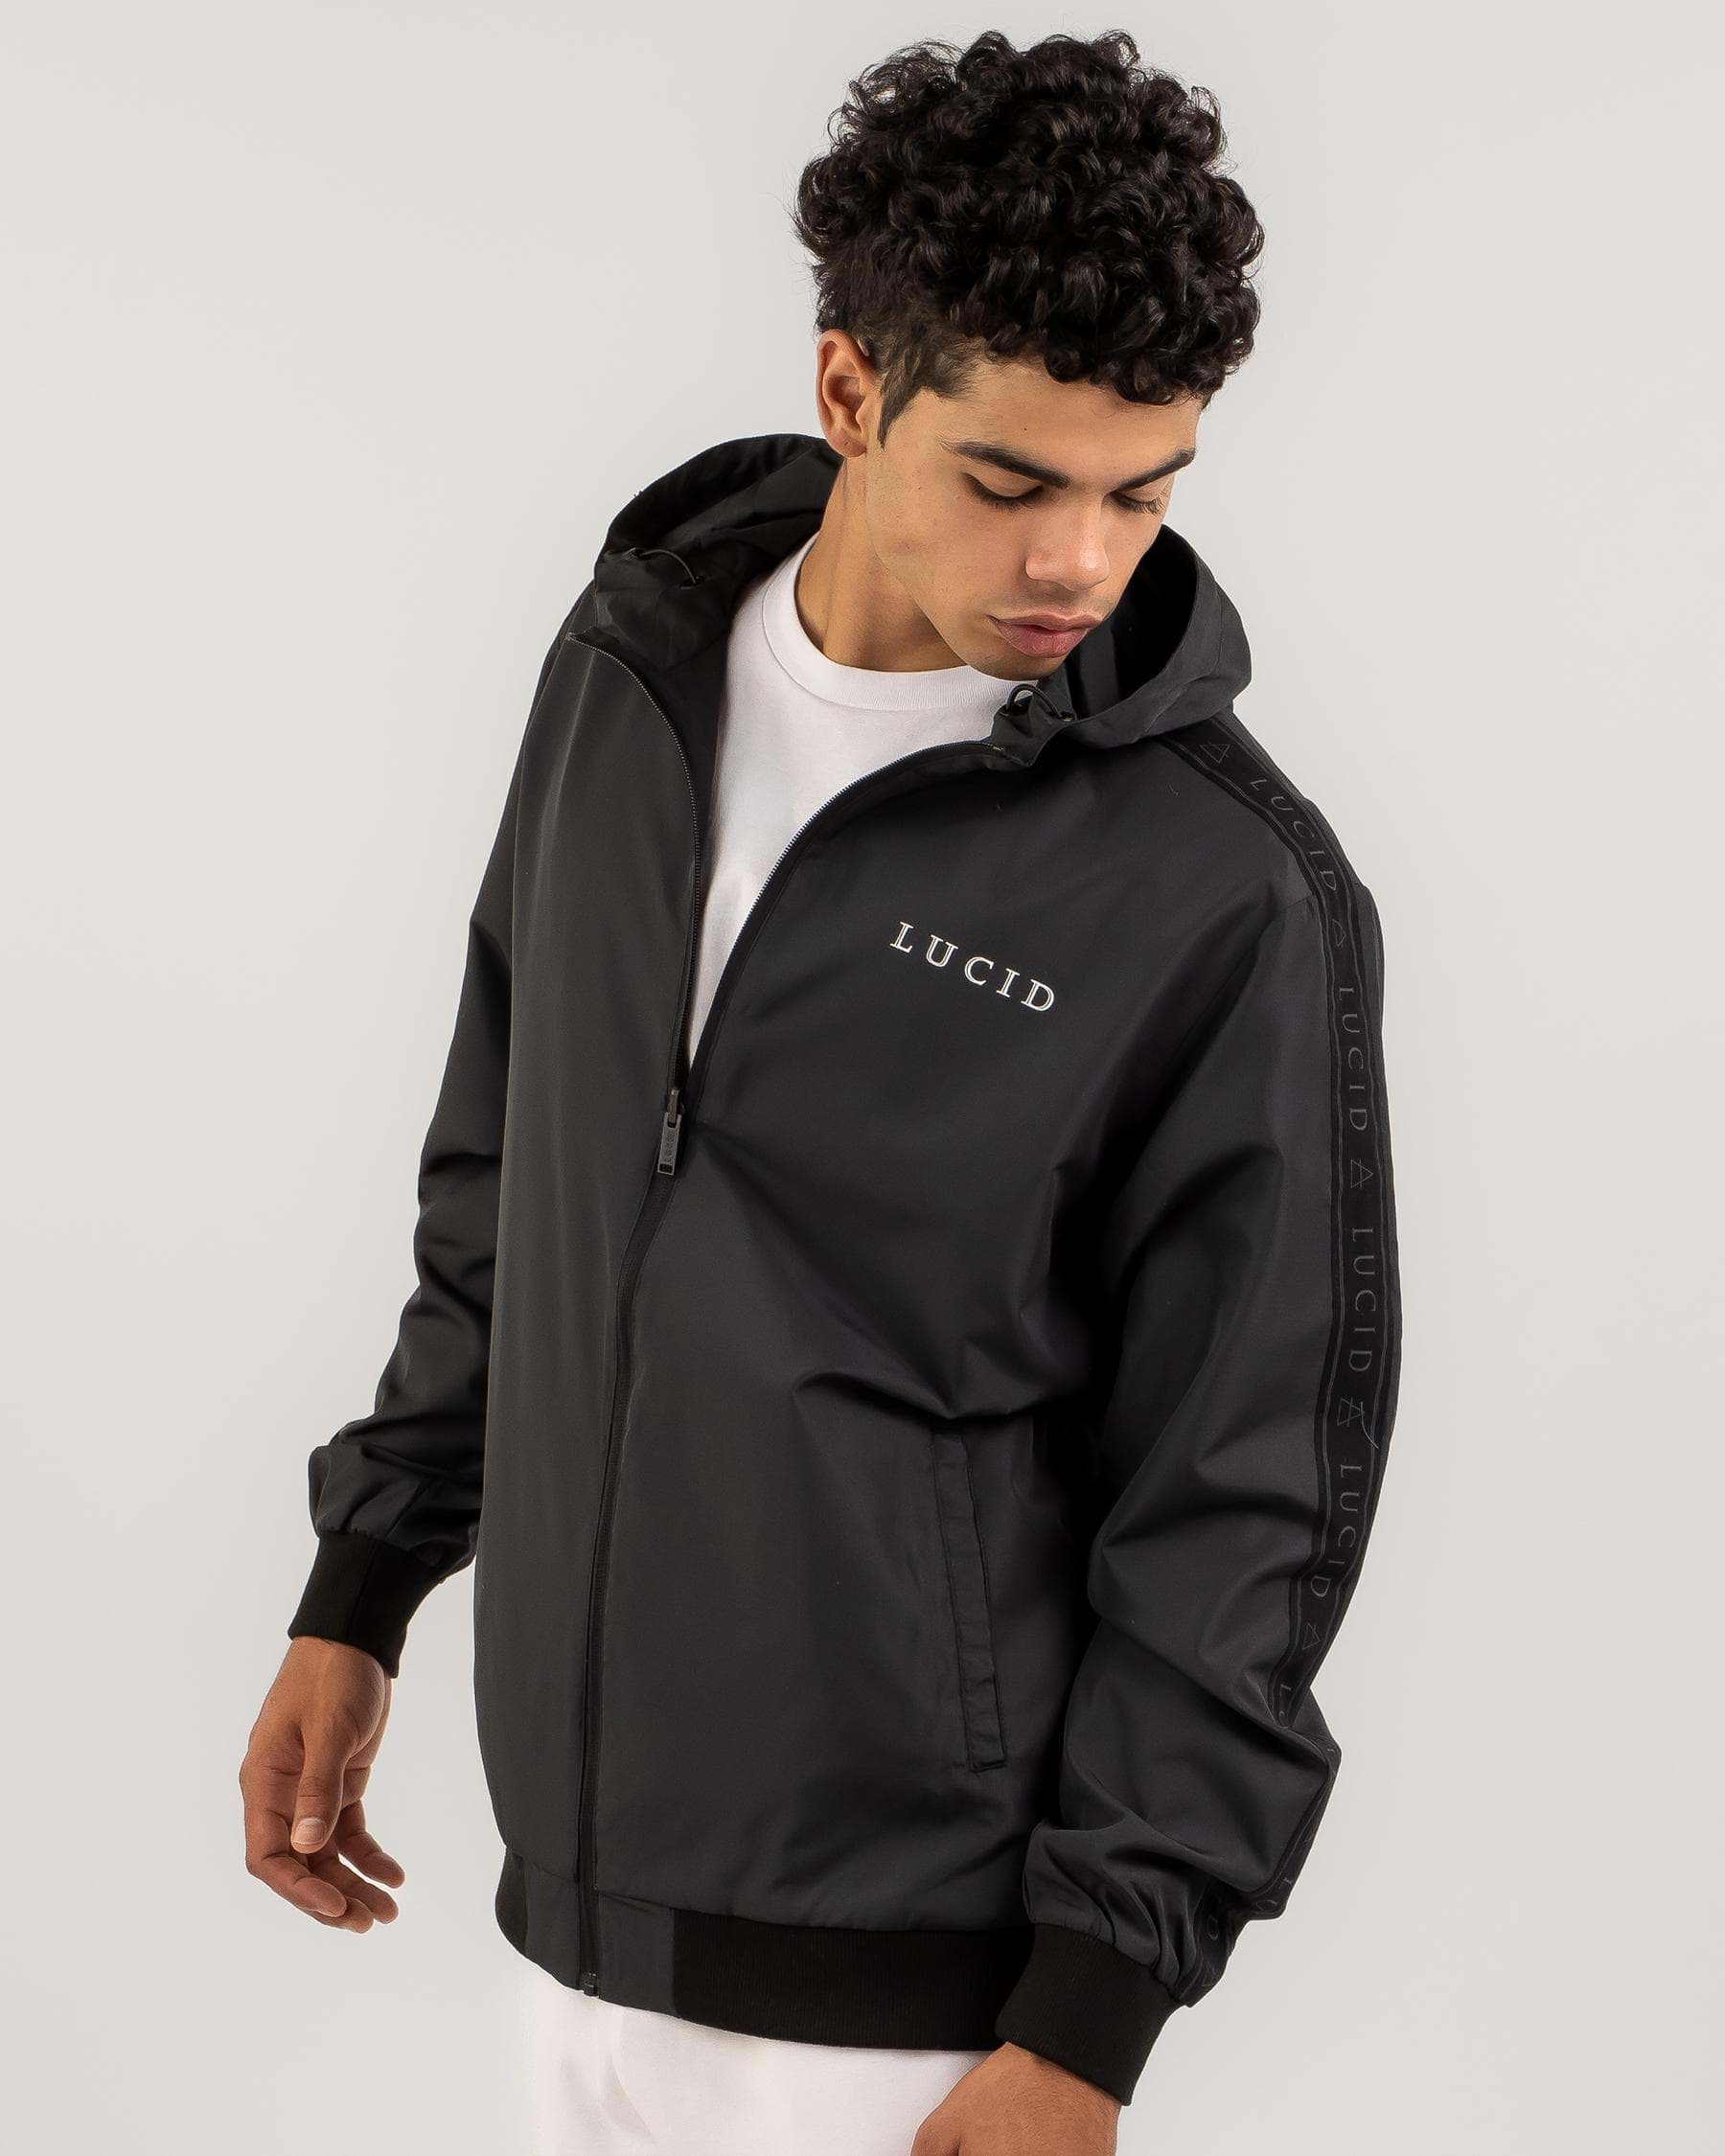 Lucid Retro Hooded Jacket In Black/charcoal - Fast Shipping & Easy ...